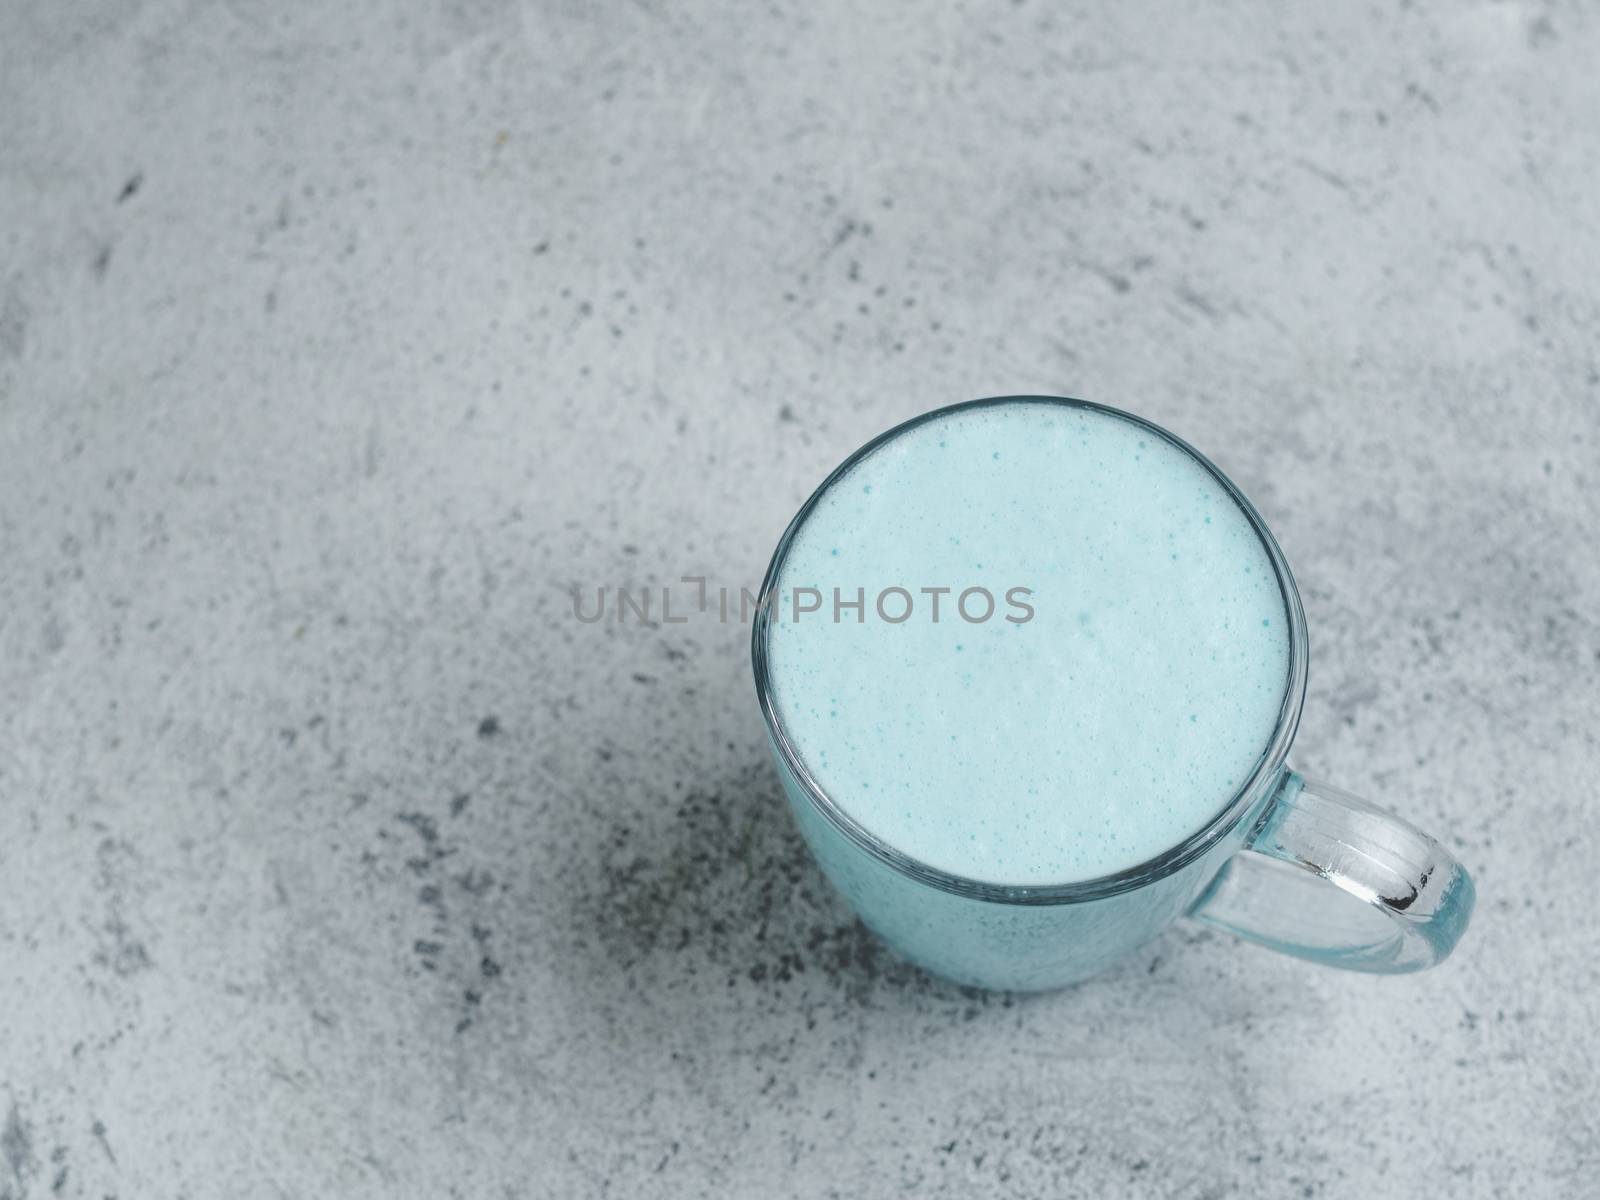 Trendy drink: Blue latte. Top view of hot butterfly pea latte or blue spirulina latte on gray cement textured background. Copy space for text. Top view or flat lay.